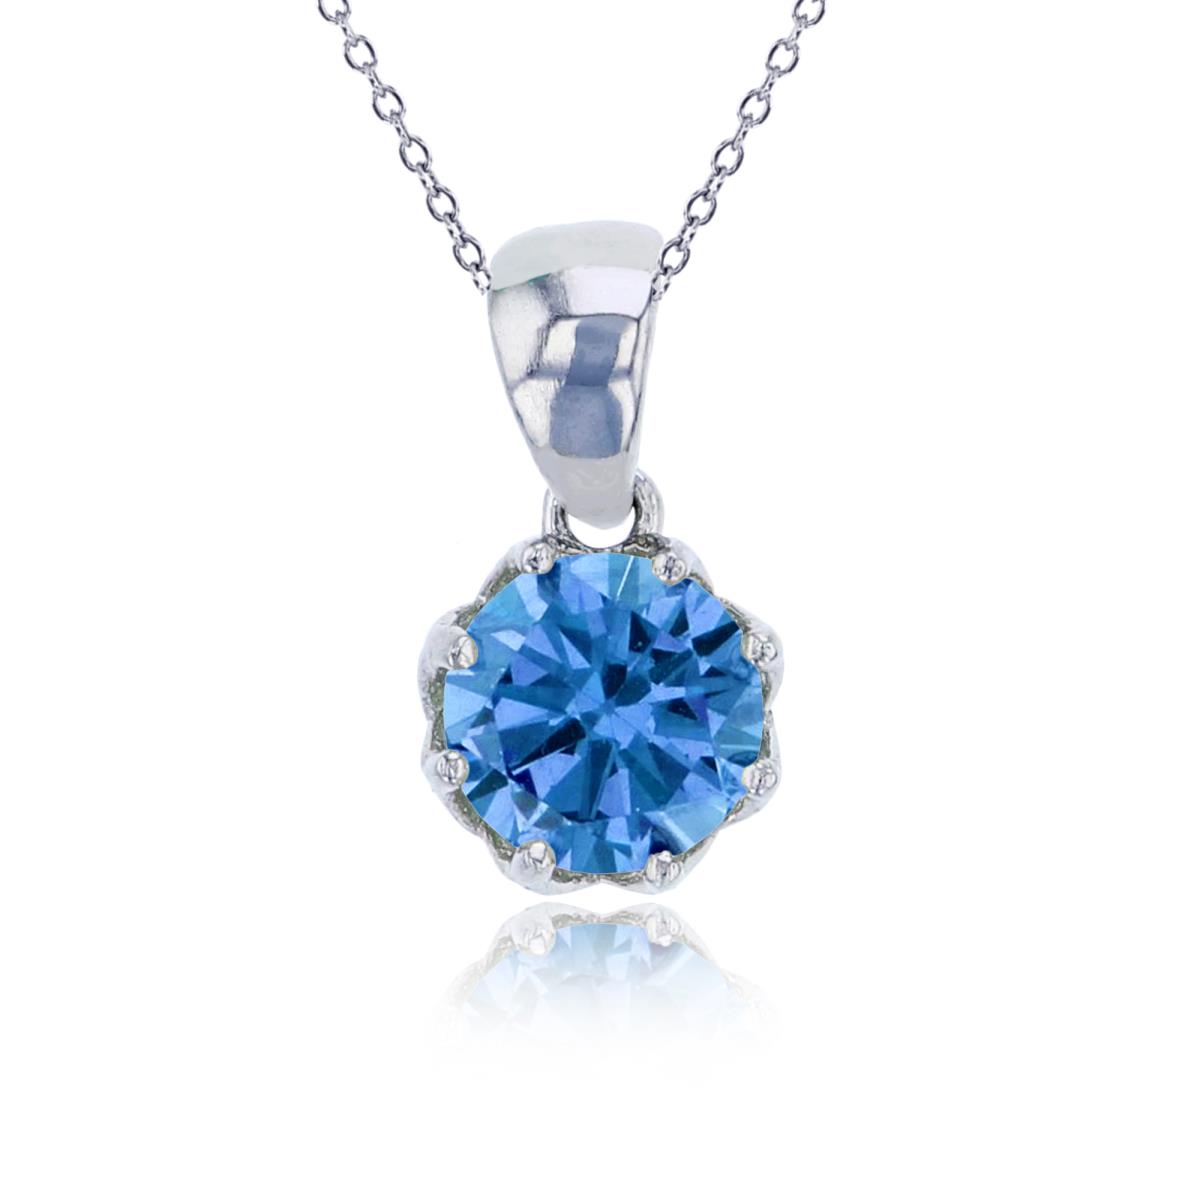 Sterling Silver Rhodium 6mm Swiss Blue Round Cut CZ Solitaire Dangling 18" Necklace